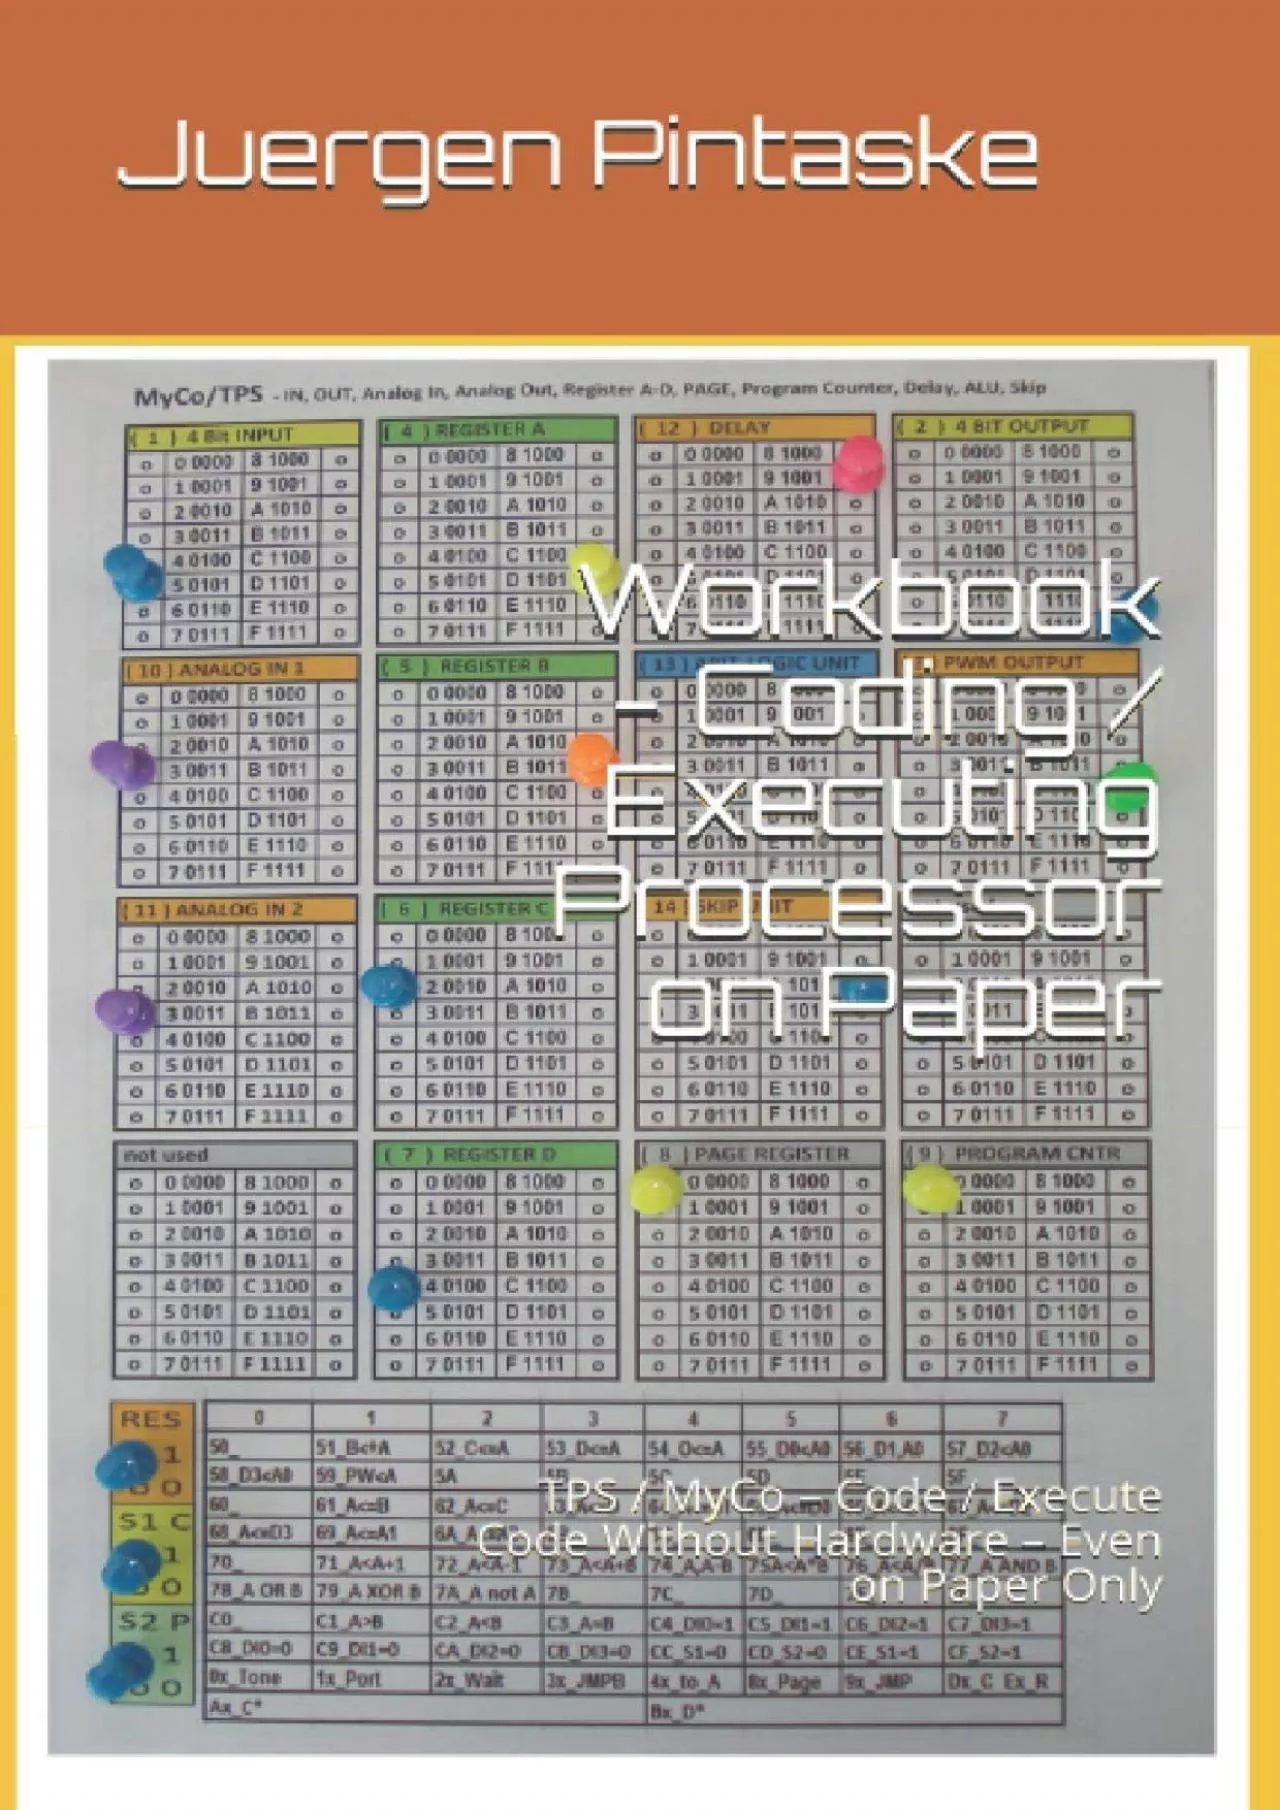 [BEST]-Workbook - Coding / Executing Processor on Paper: TPS / MyCo – Code / Execute